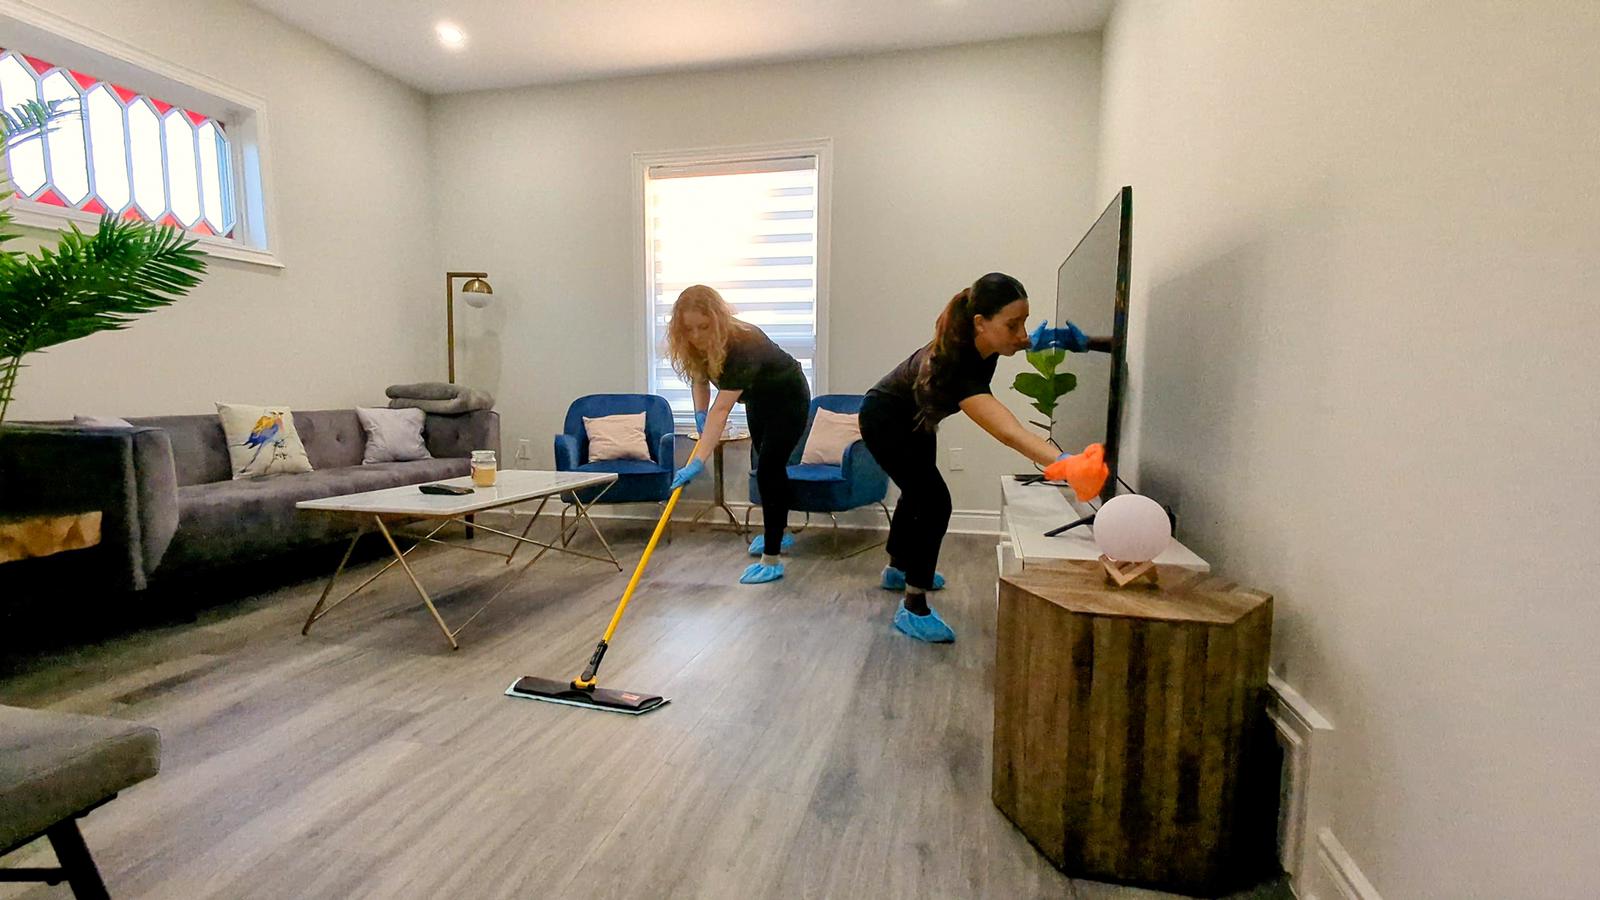 3 people cleaning